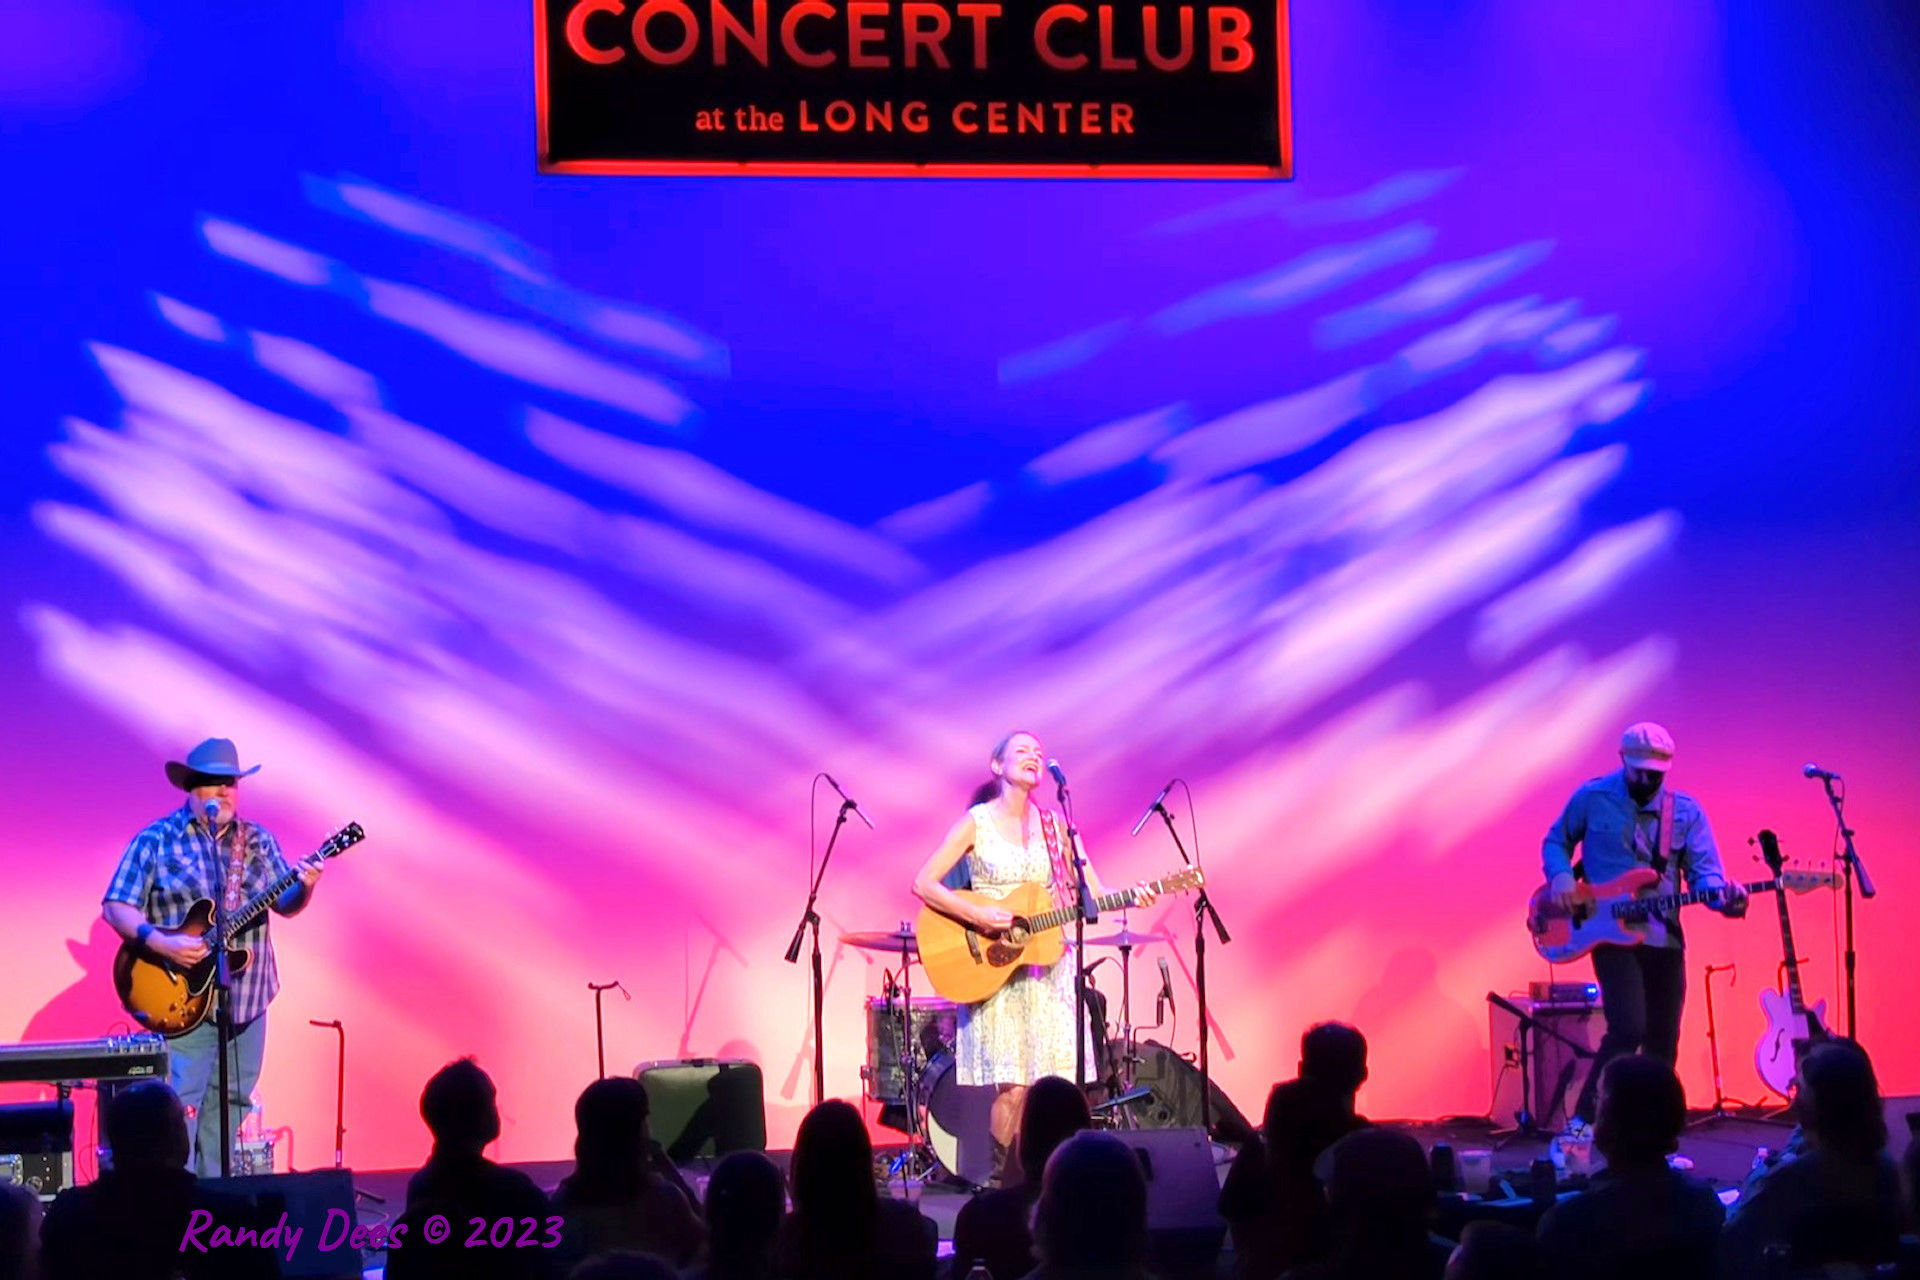 Concert Club at the Long Center